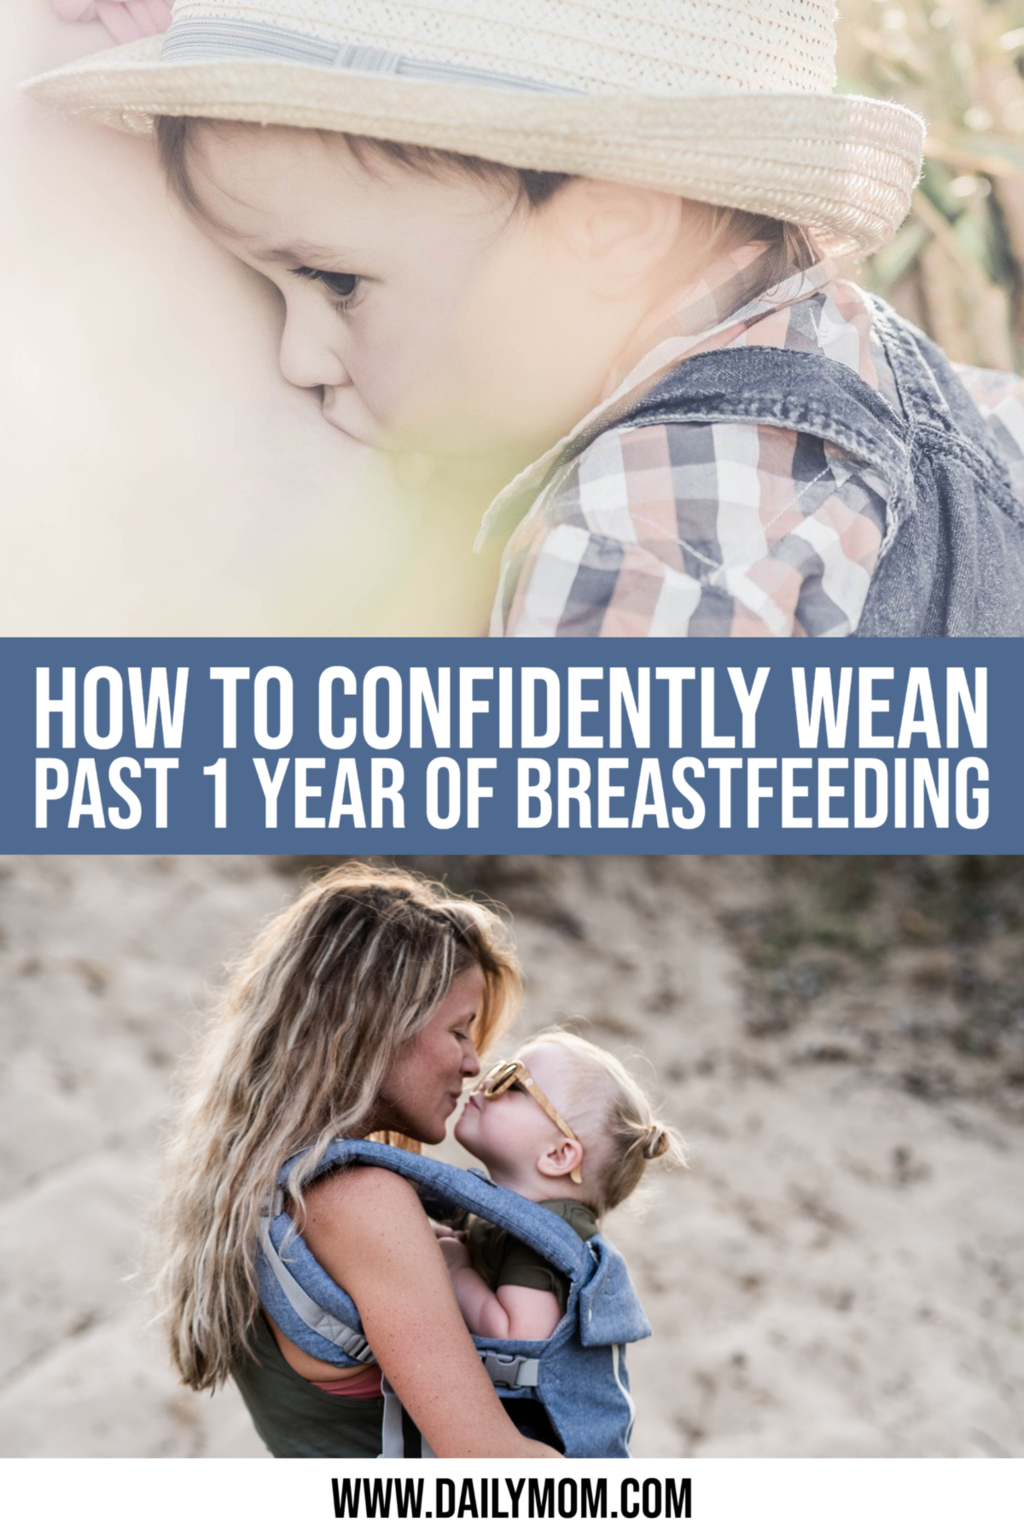 Extended Breastfeeding: How To Confidently Wean And Keep The Amazing Bond With Your Baby